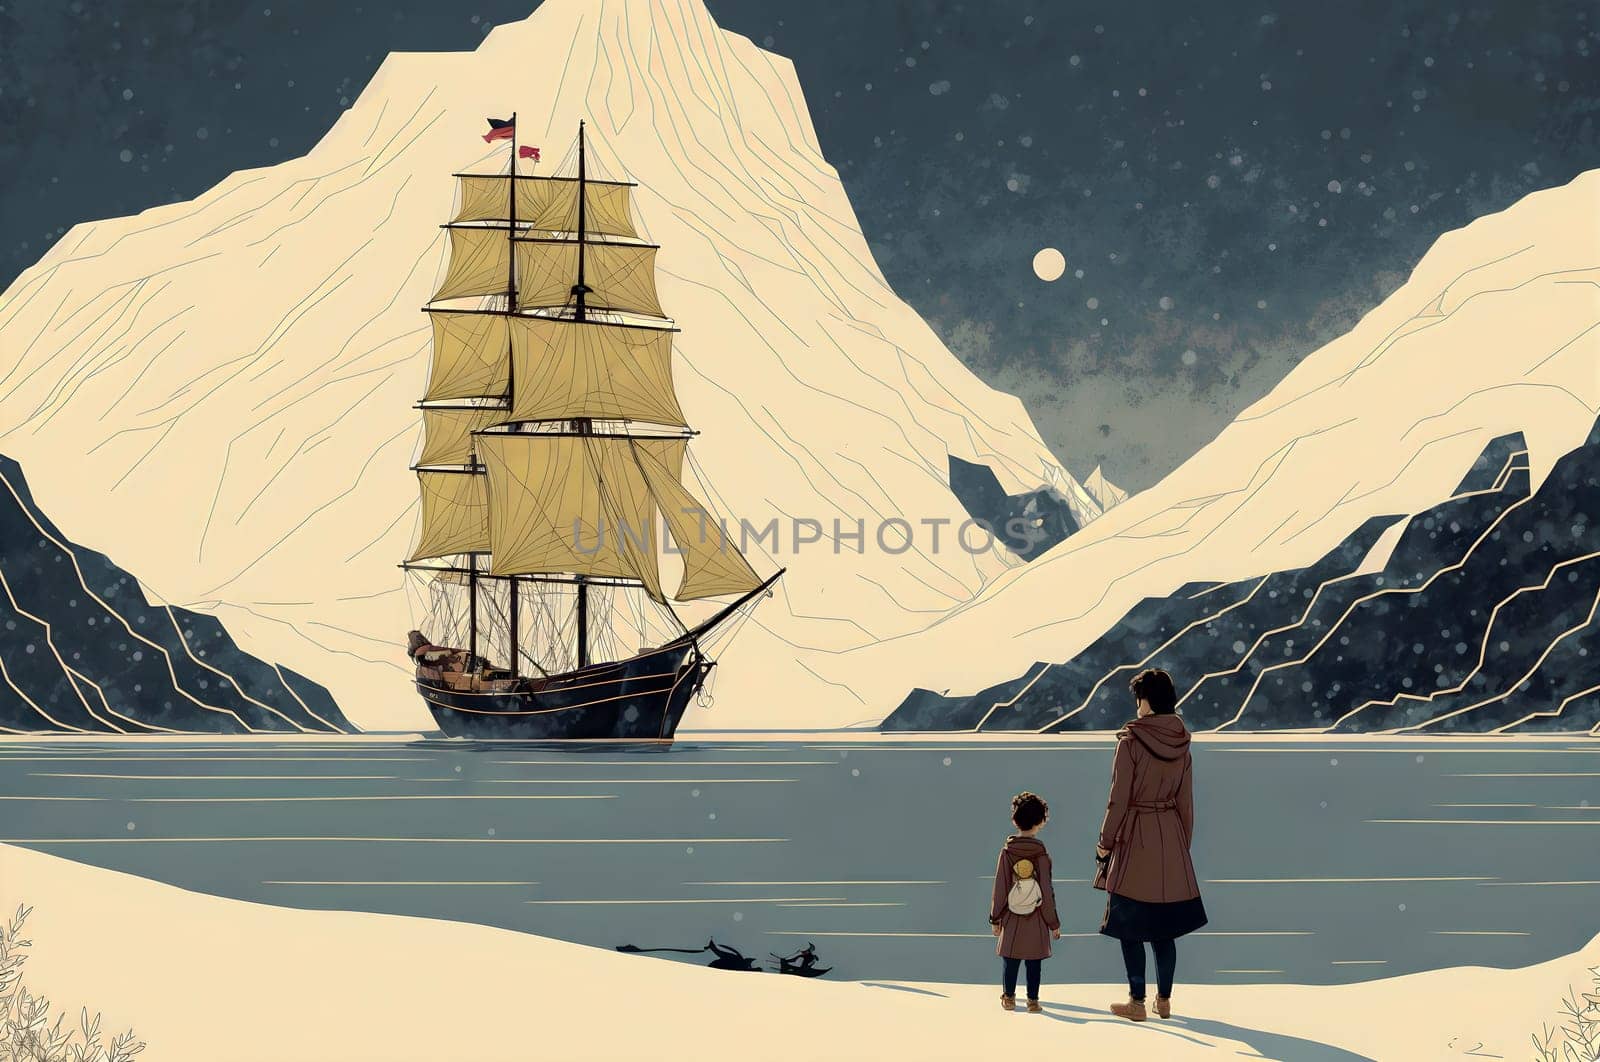 Arctic Voyage: Mother and Child Observing a Ship by chrisroll